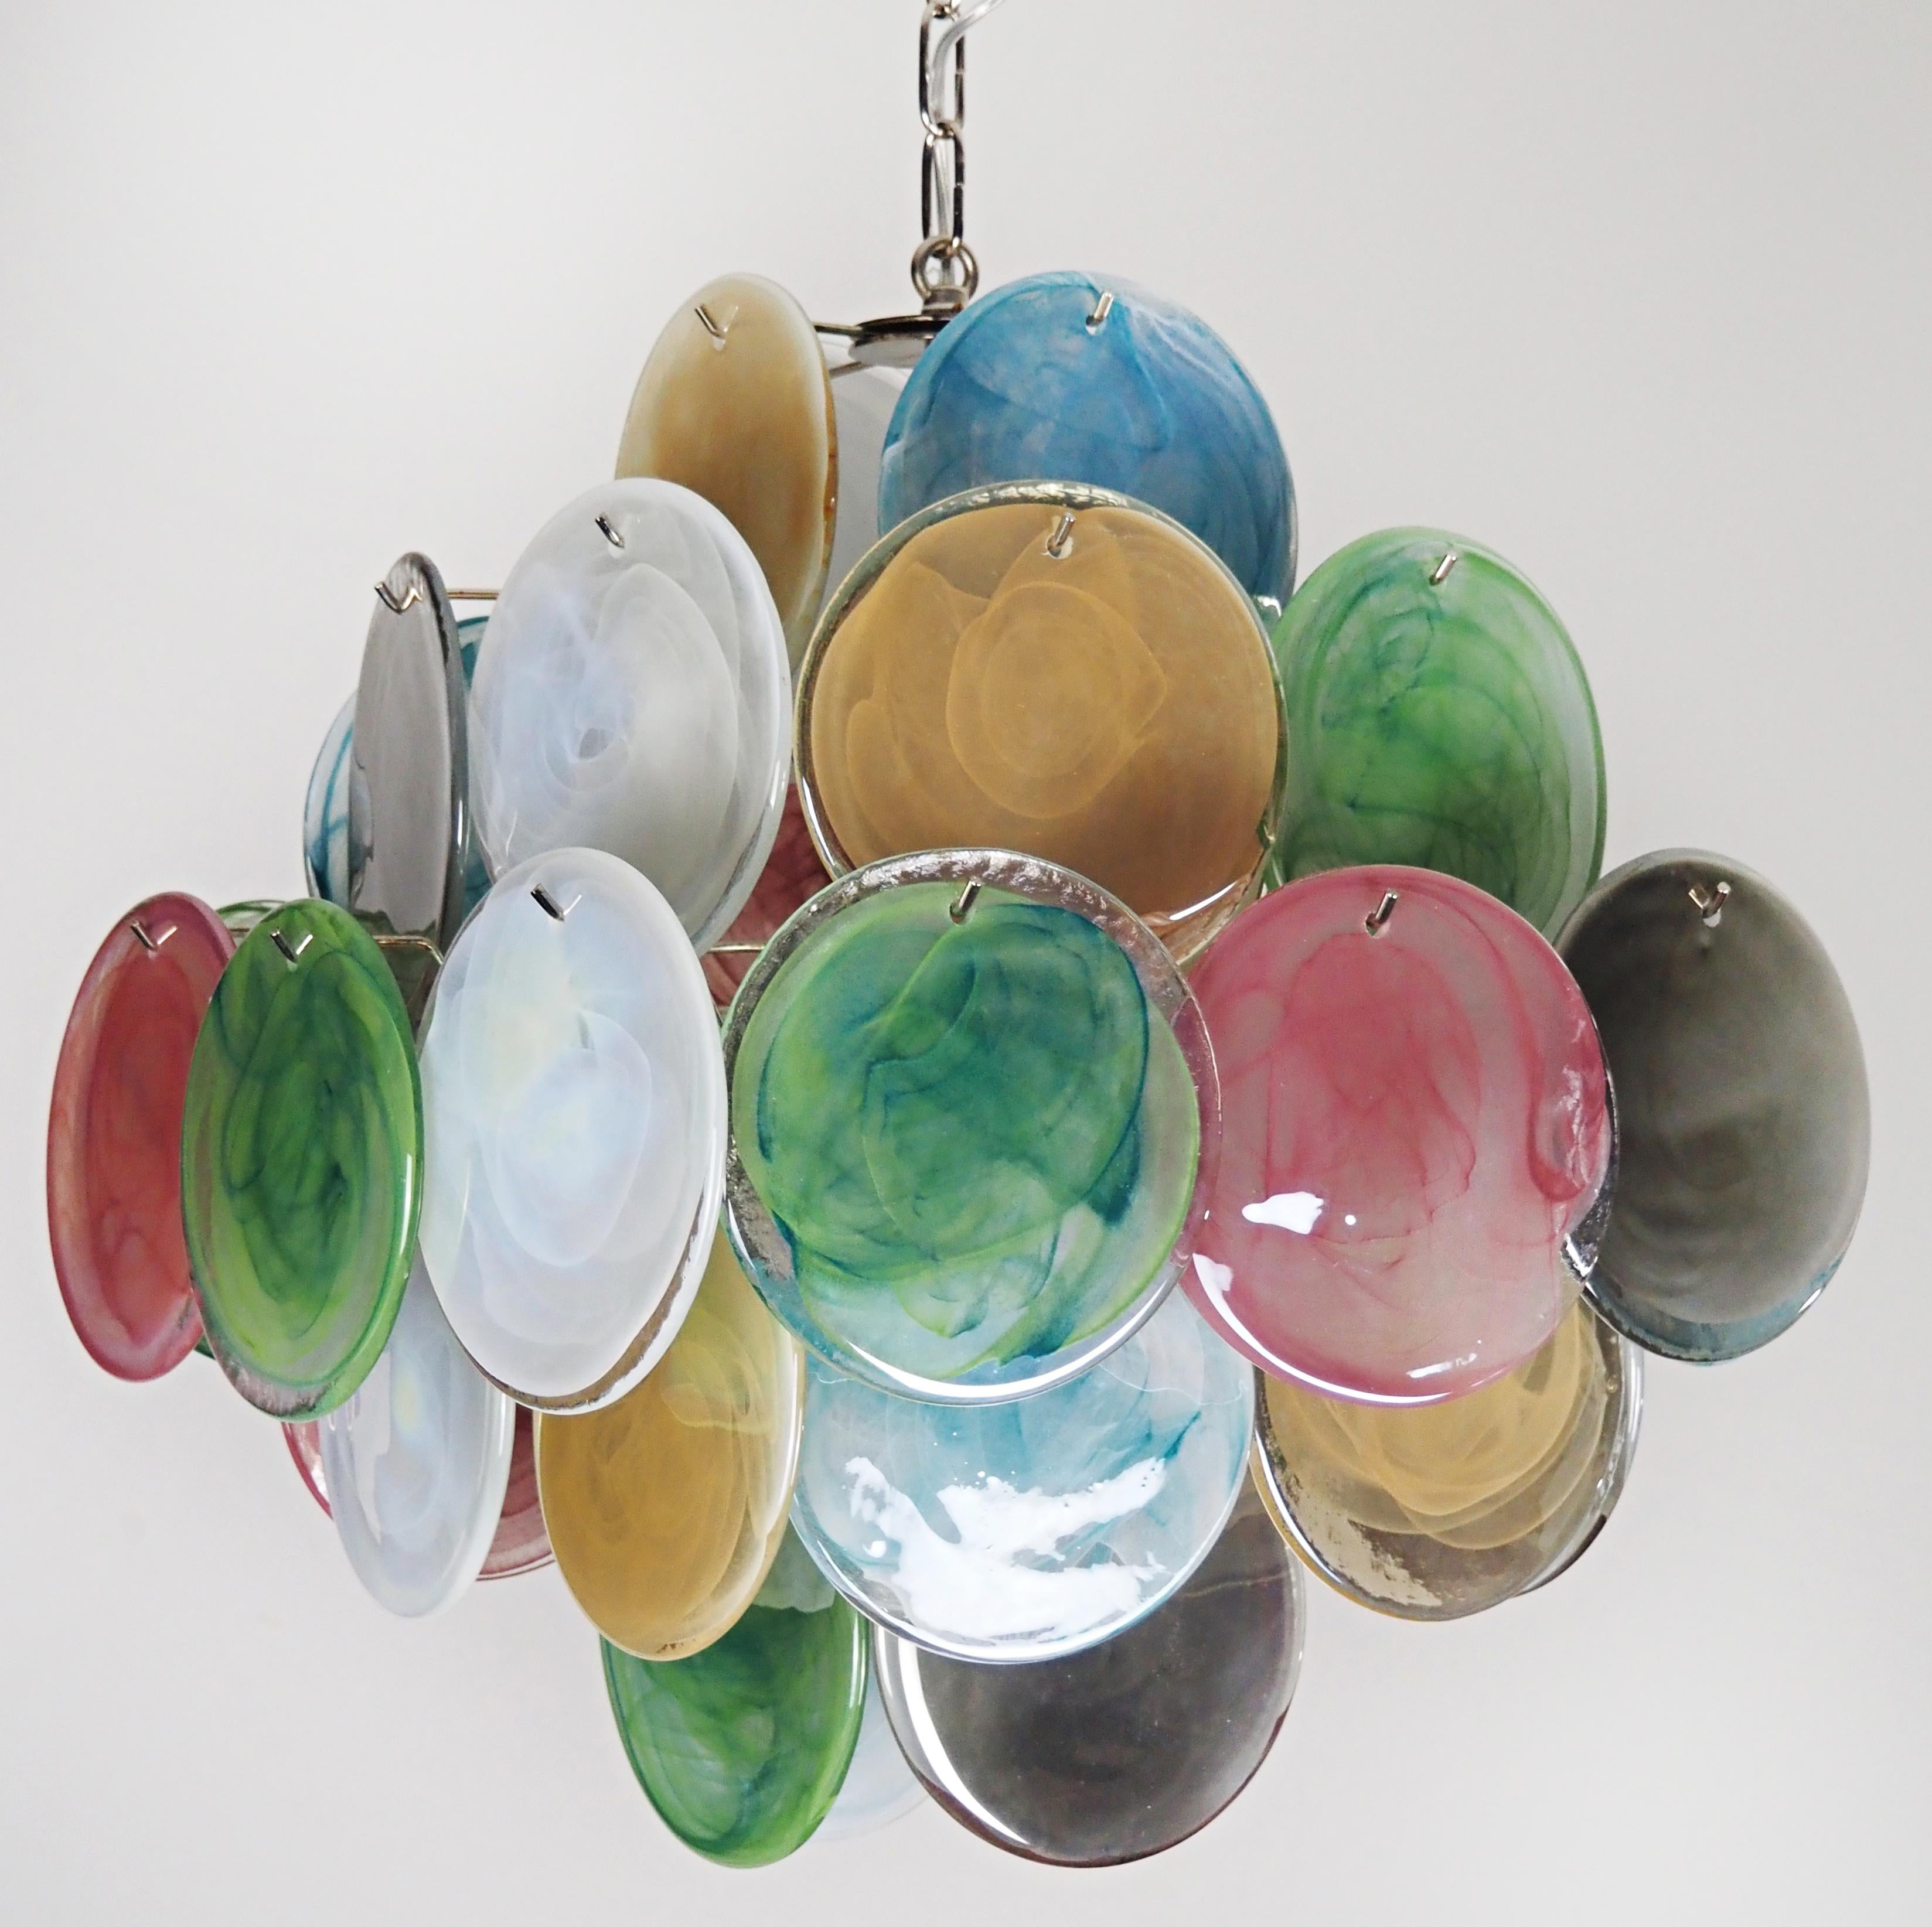 Beautiful Vintage Italian Murano chandeliers - 36 alabaster multicolored disks For Sale 4